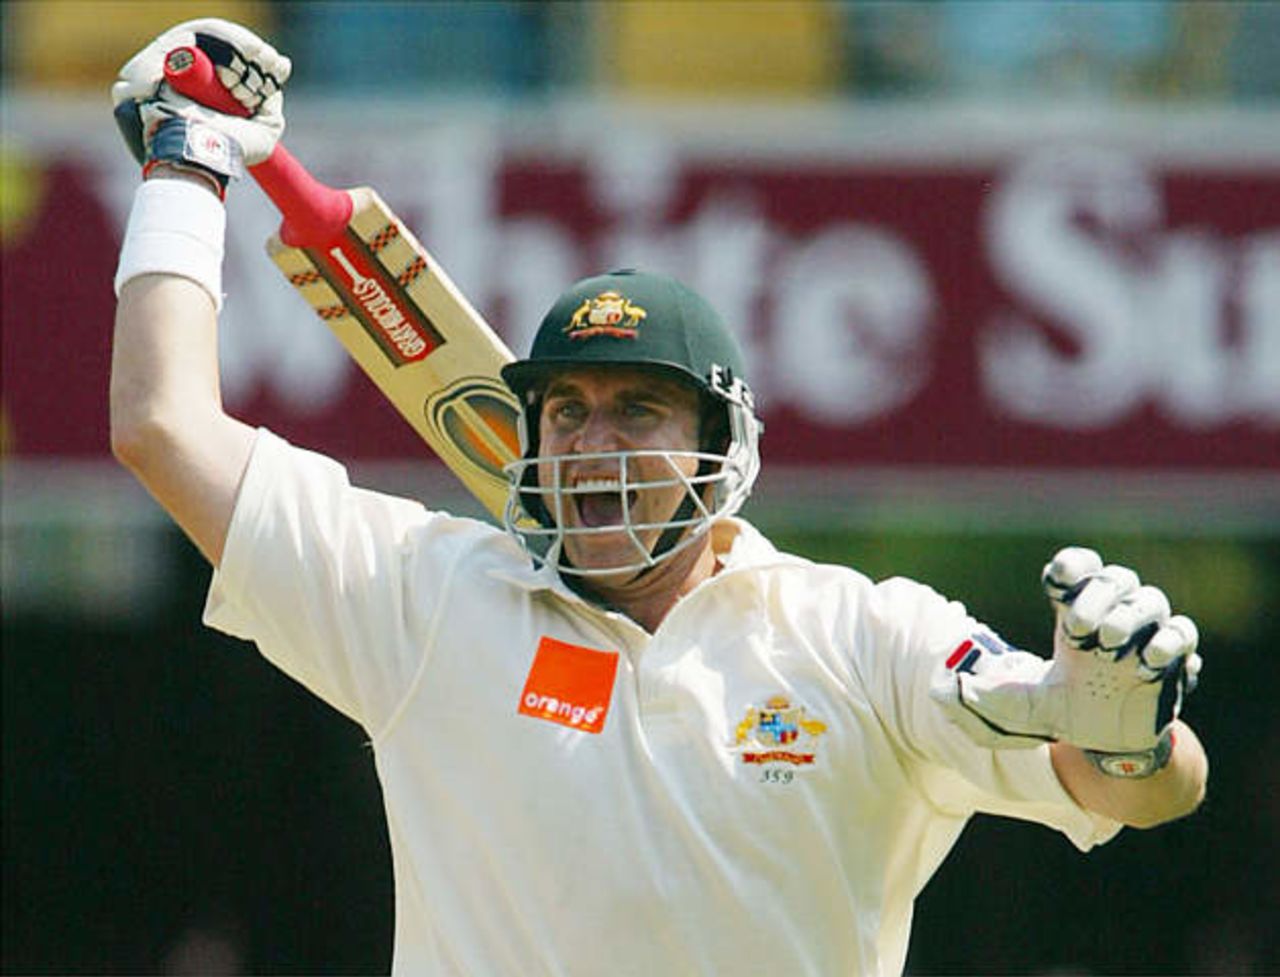 Australia's Matthew Hayden celebrates reaching his century during the first day's play in the first Ashes test match against England at the Gabba in Brisbane November 7, 2002.